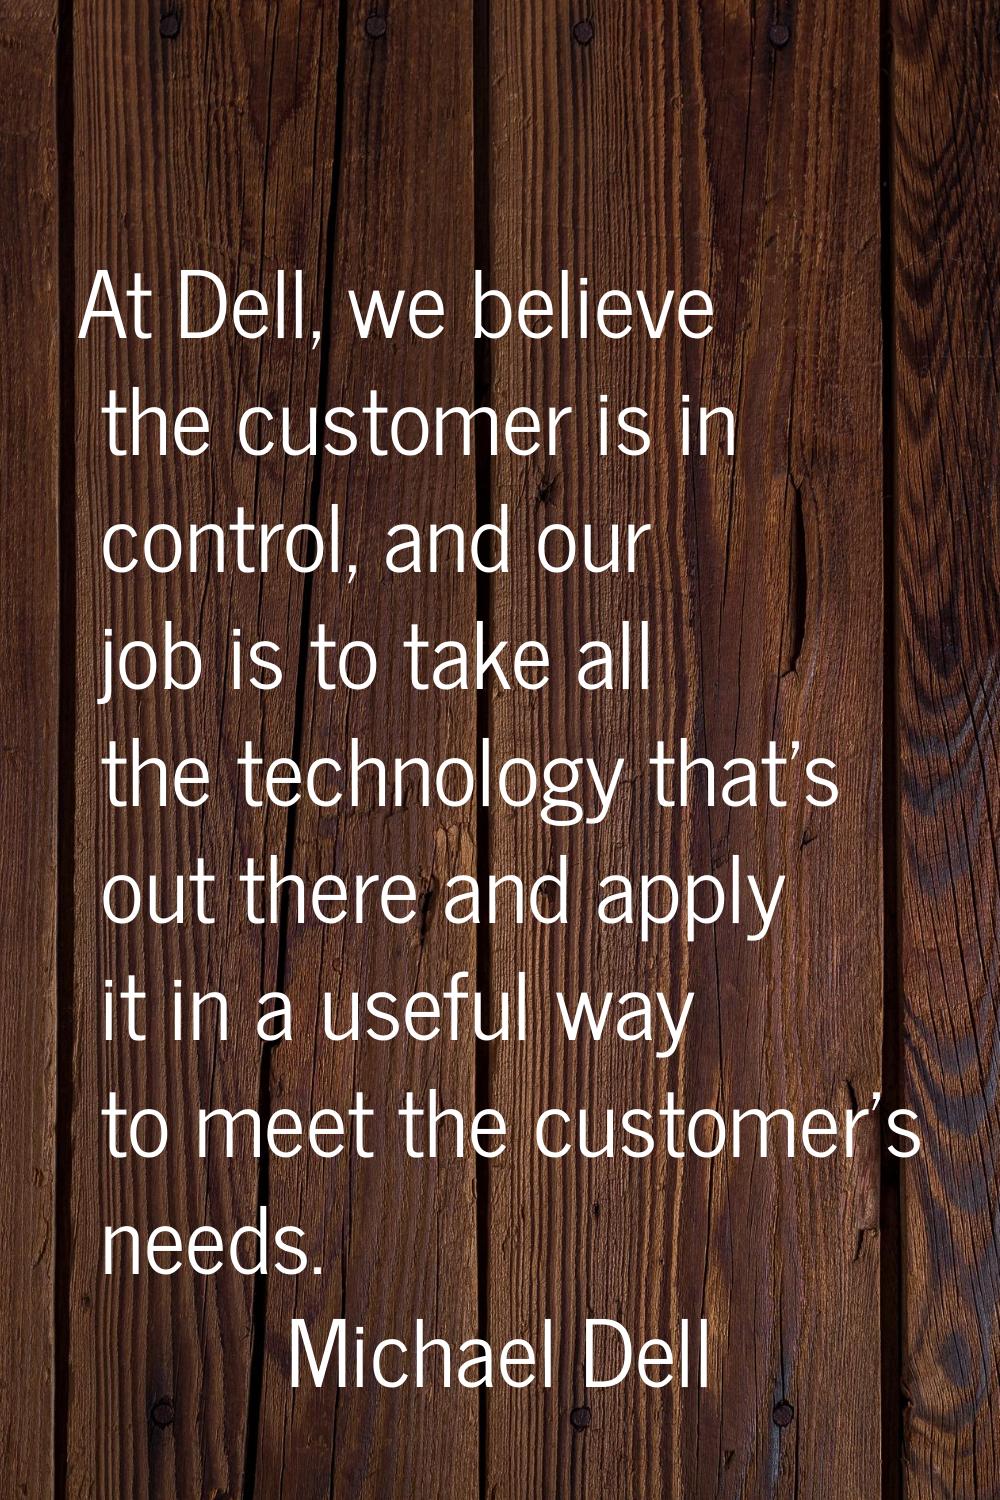 At Dell, we believe the customer is in control, and our job is to take all the technology that's ou